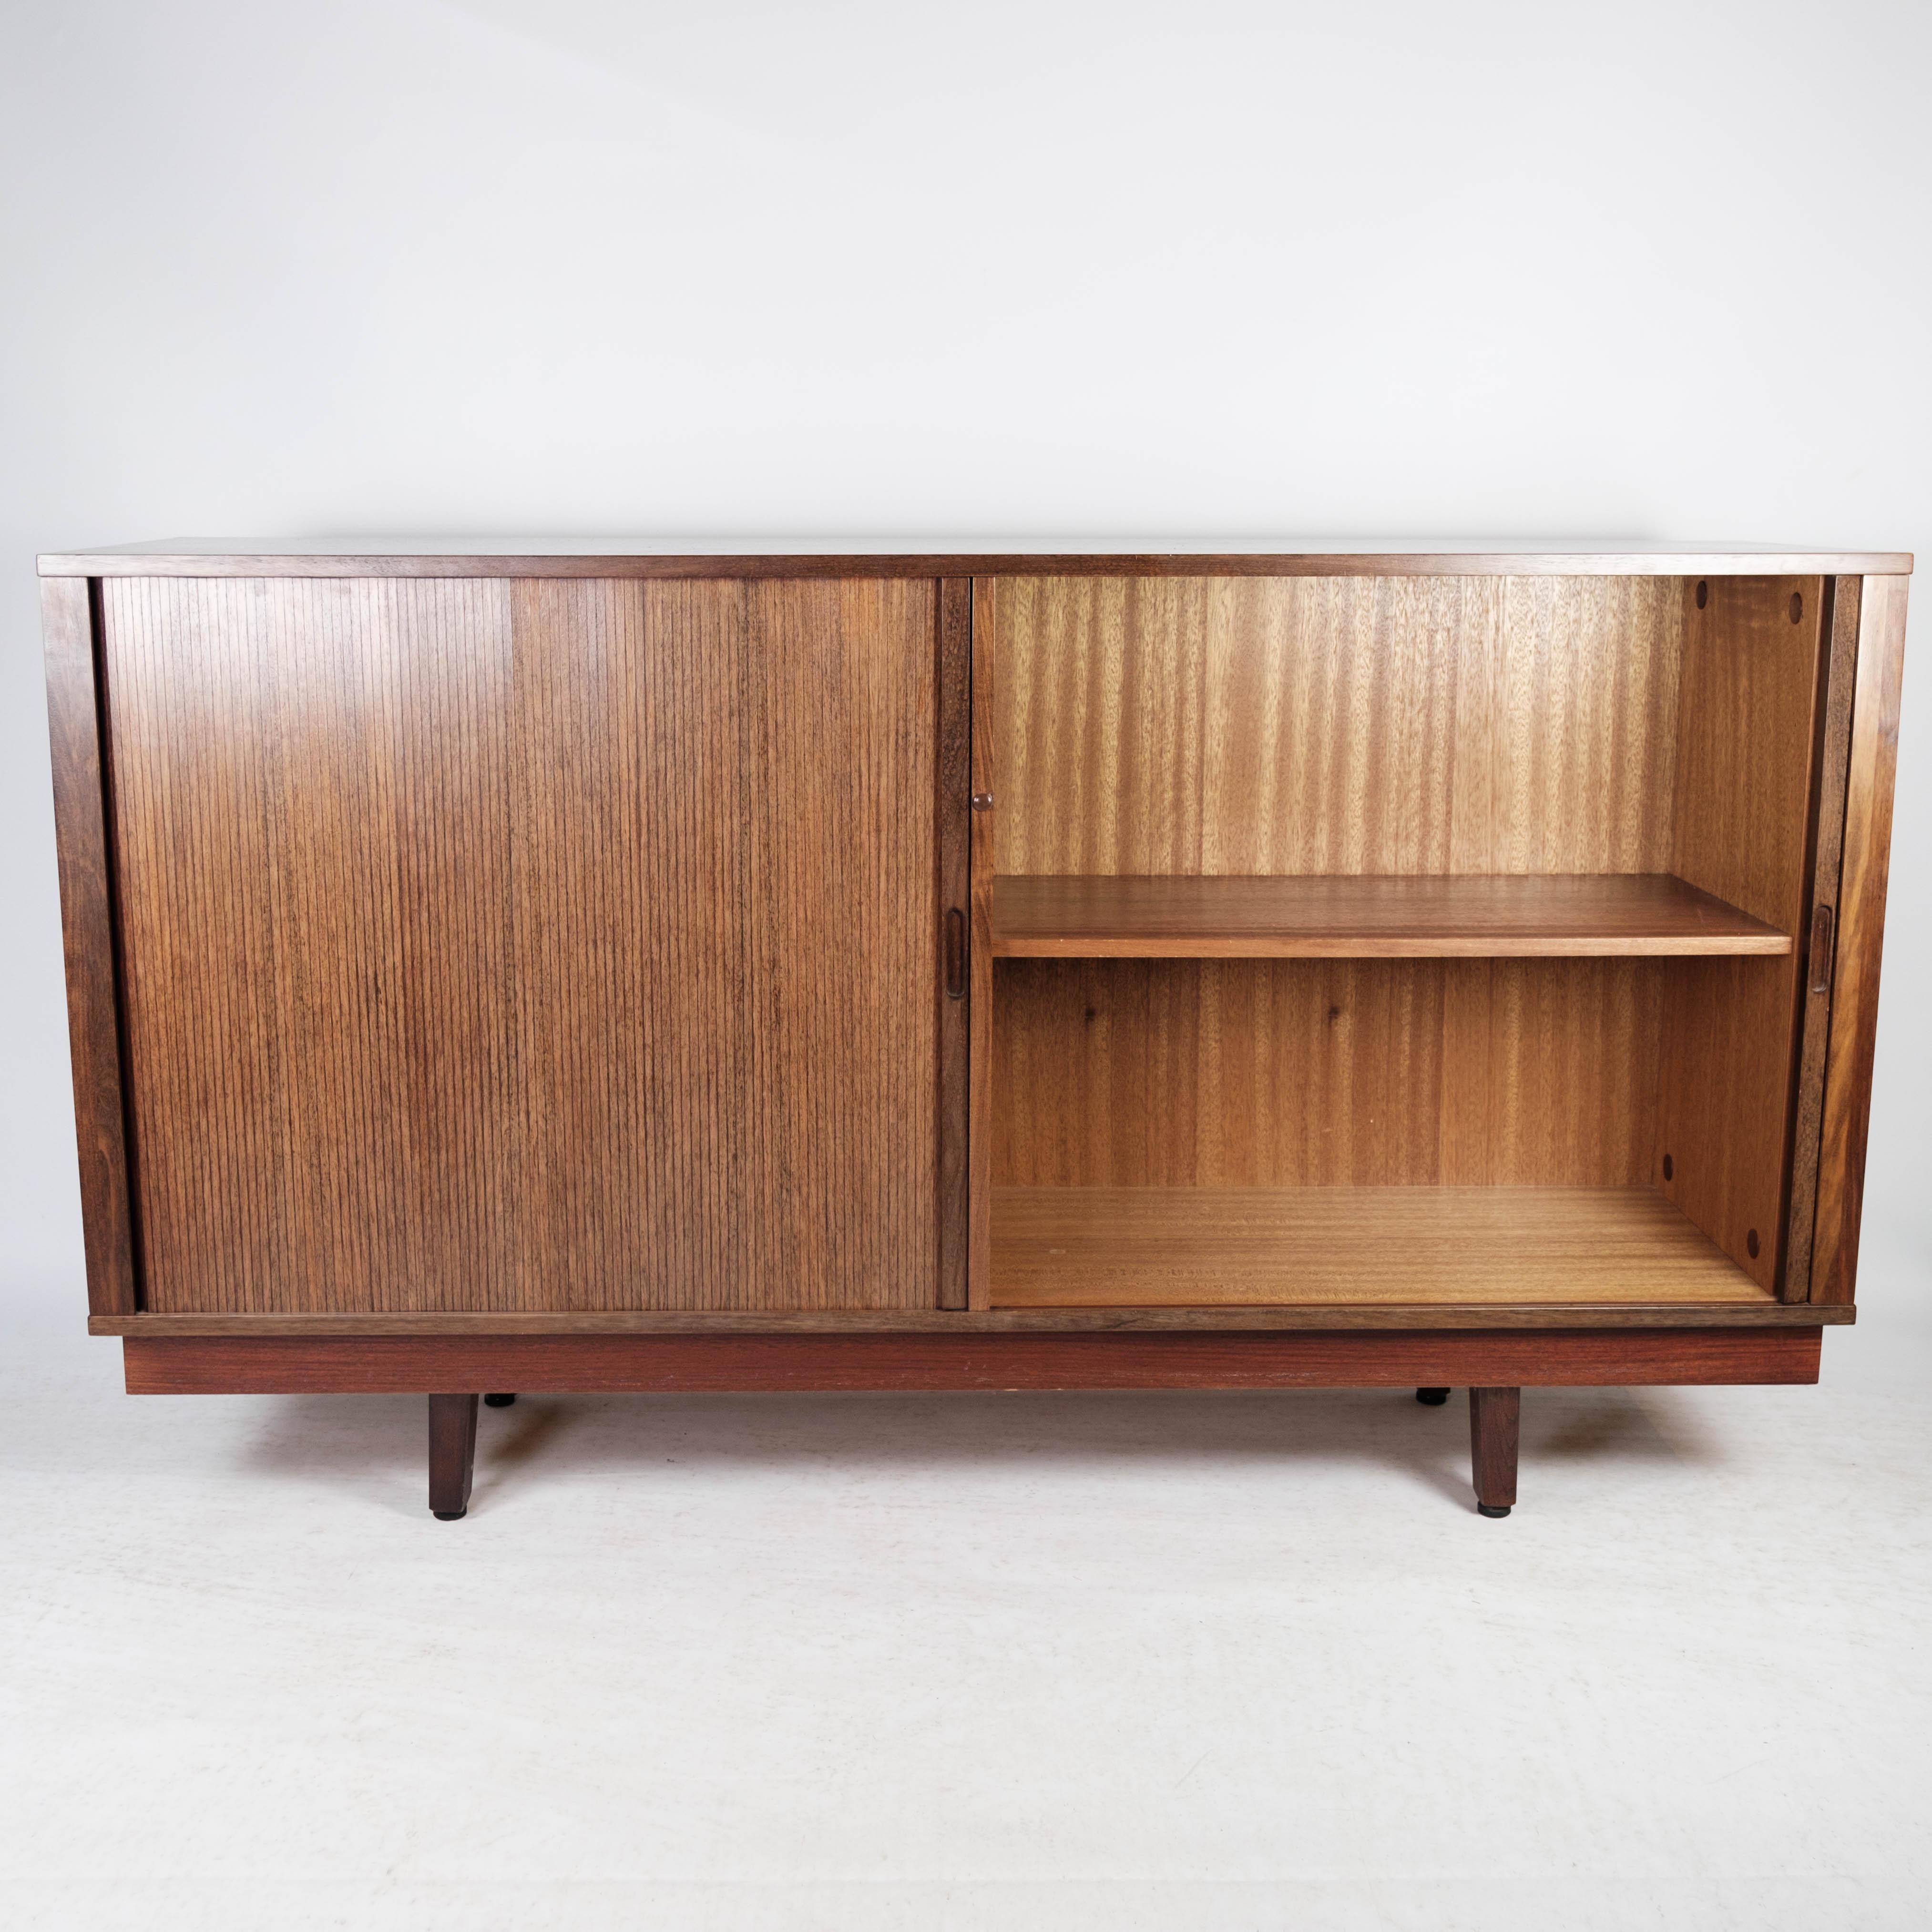 Low Sideboard with Sliding Doors in Rosewood of Danish Design from the 1960s 4